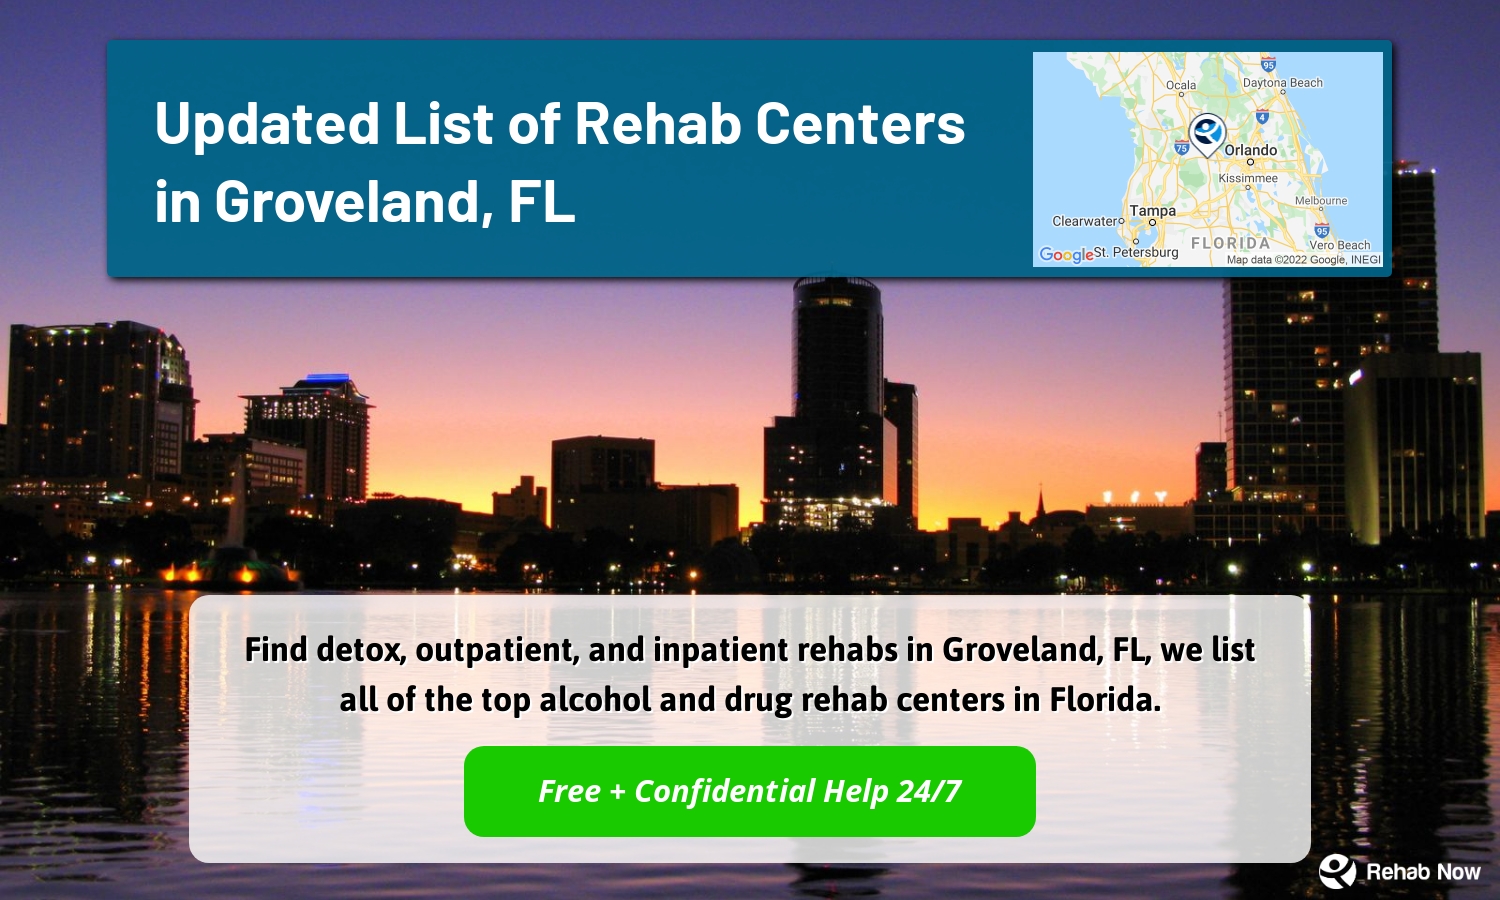 Find detox, outpatient, and inpatient rehabs in Groveland, FL, we list all of the top alcohol and drug rehab centers in Florida.